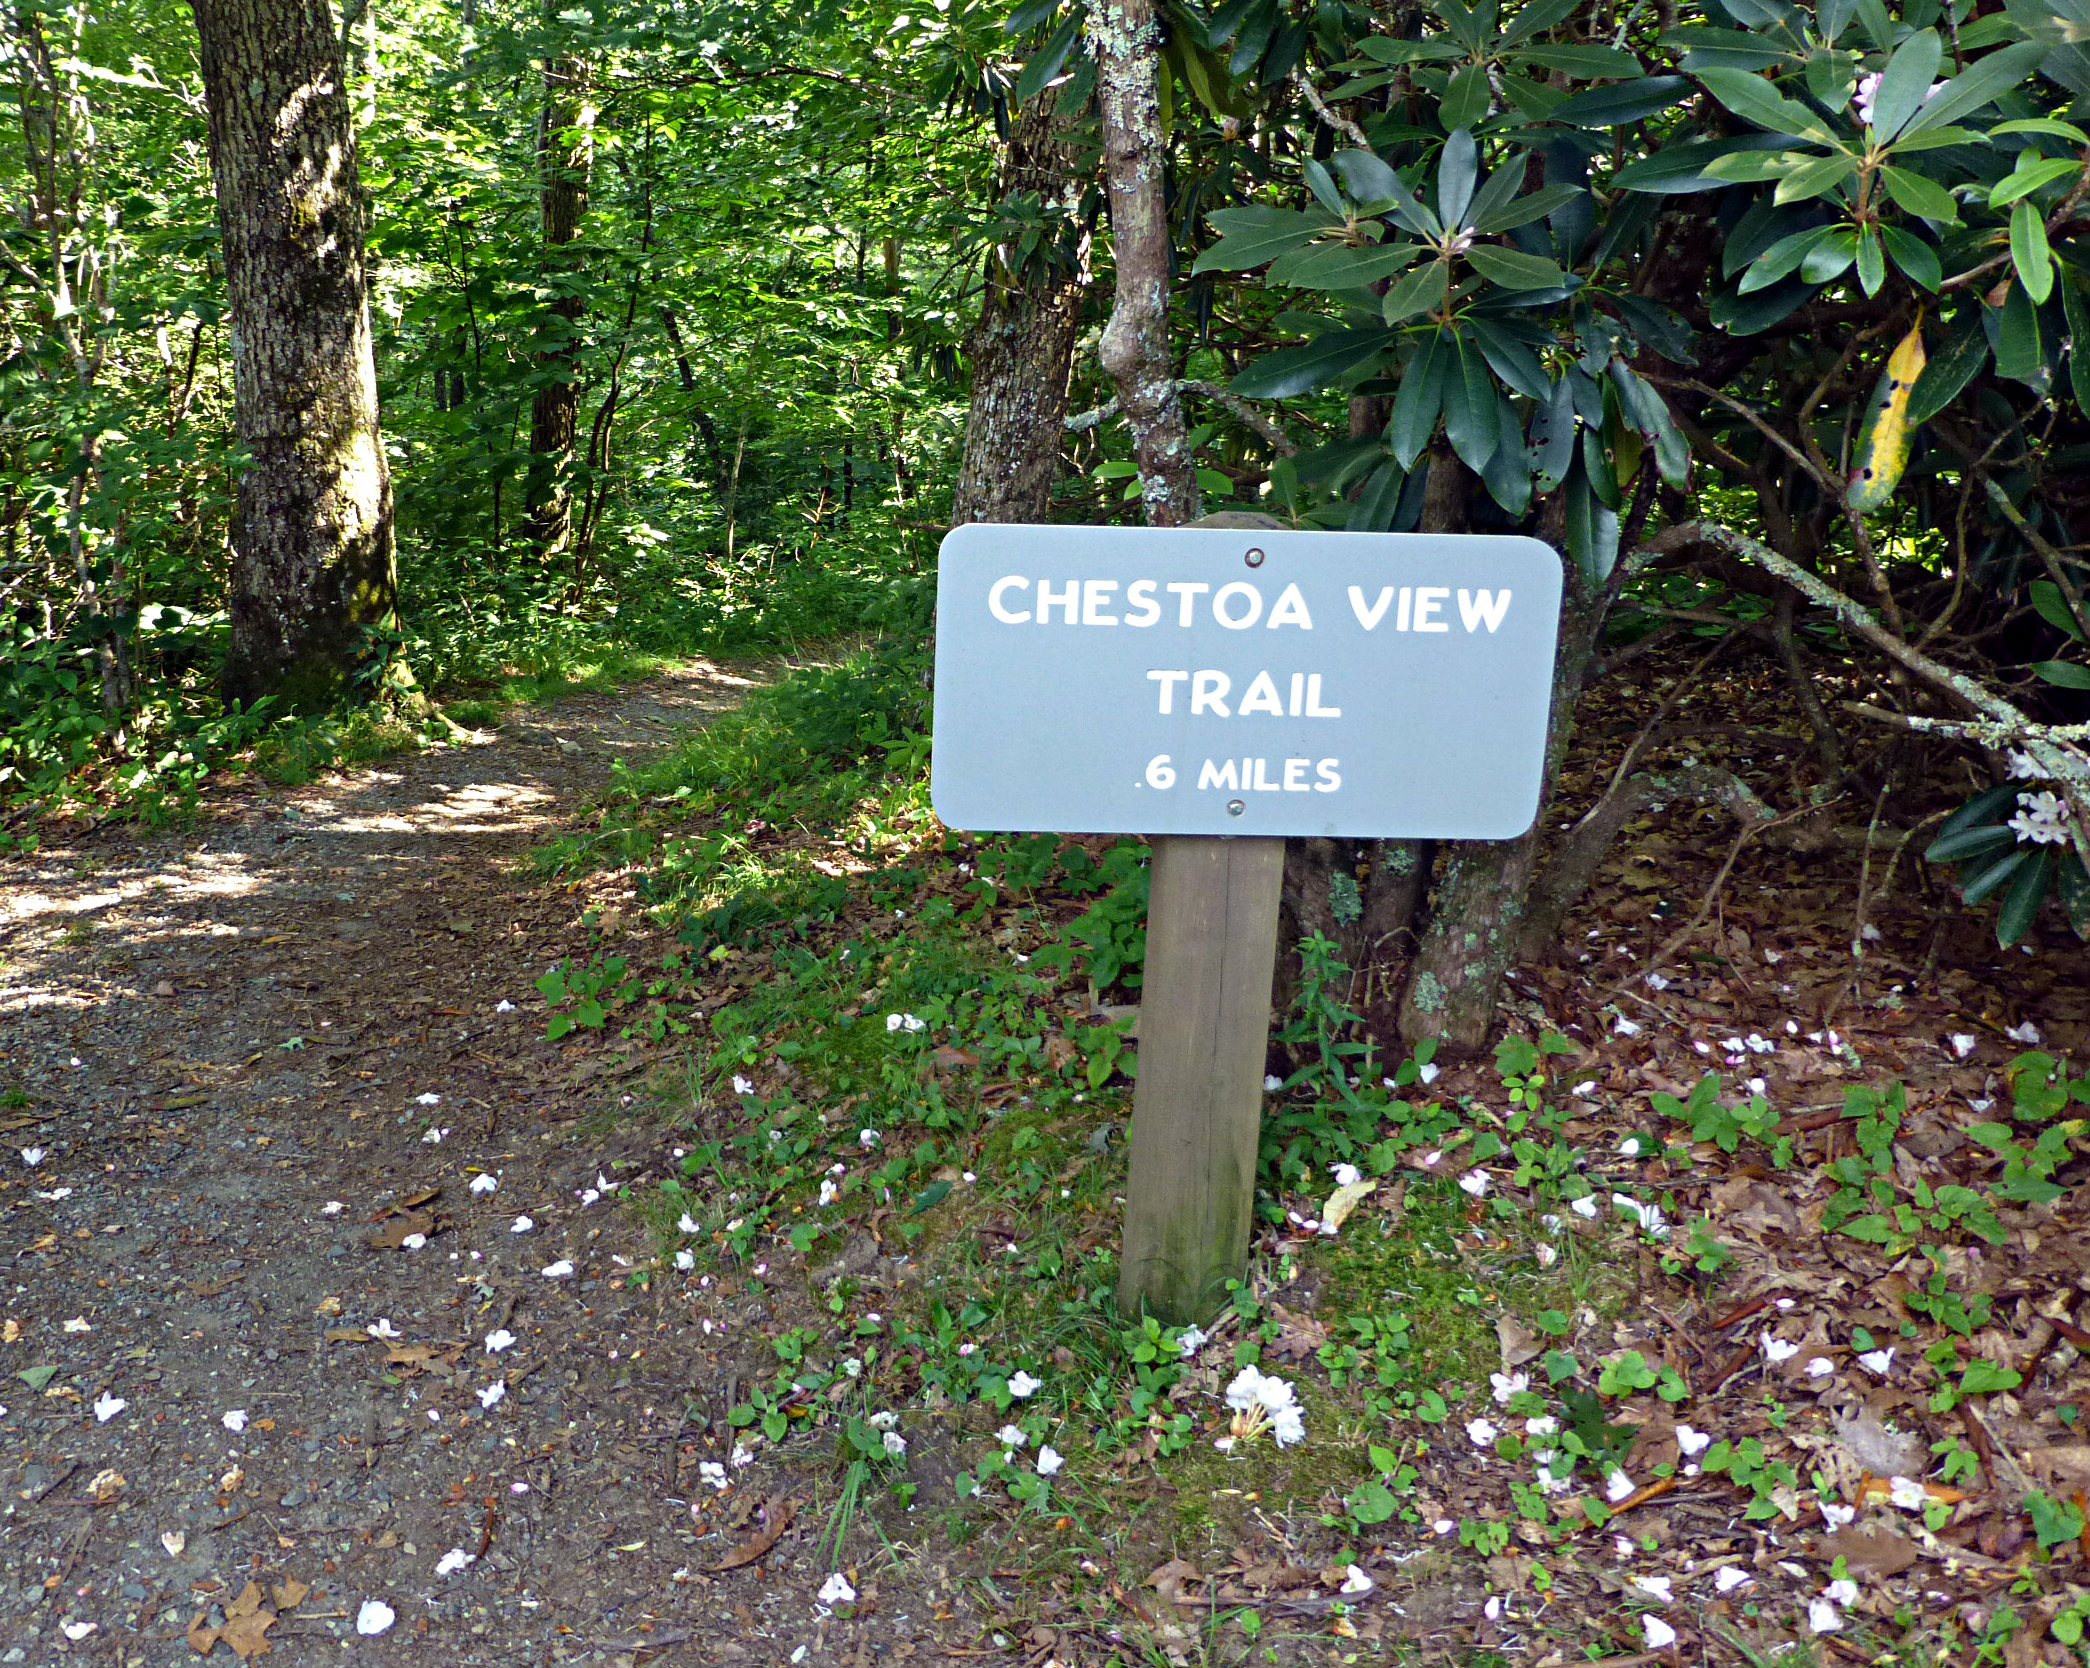 Start of a wooded trail with a sign reading Chestoa View Trail .6 miles